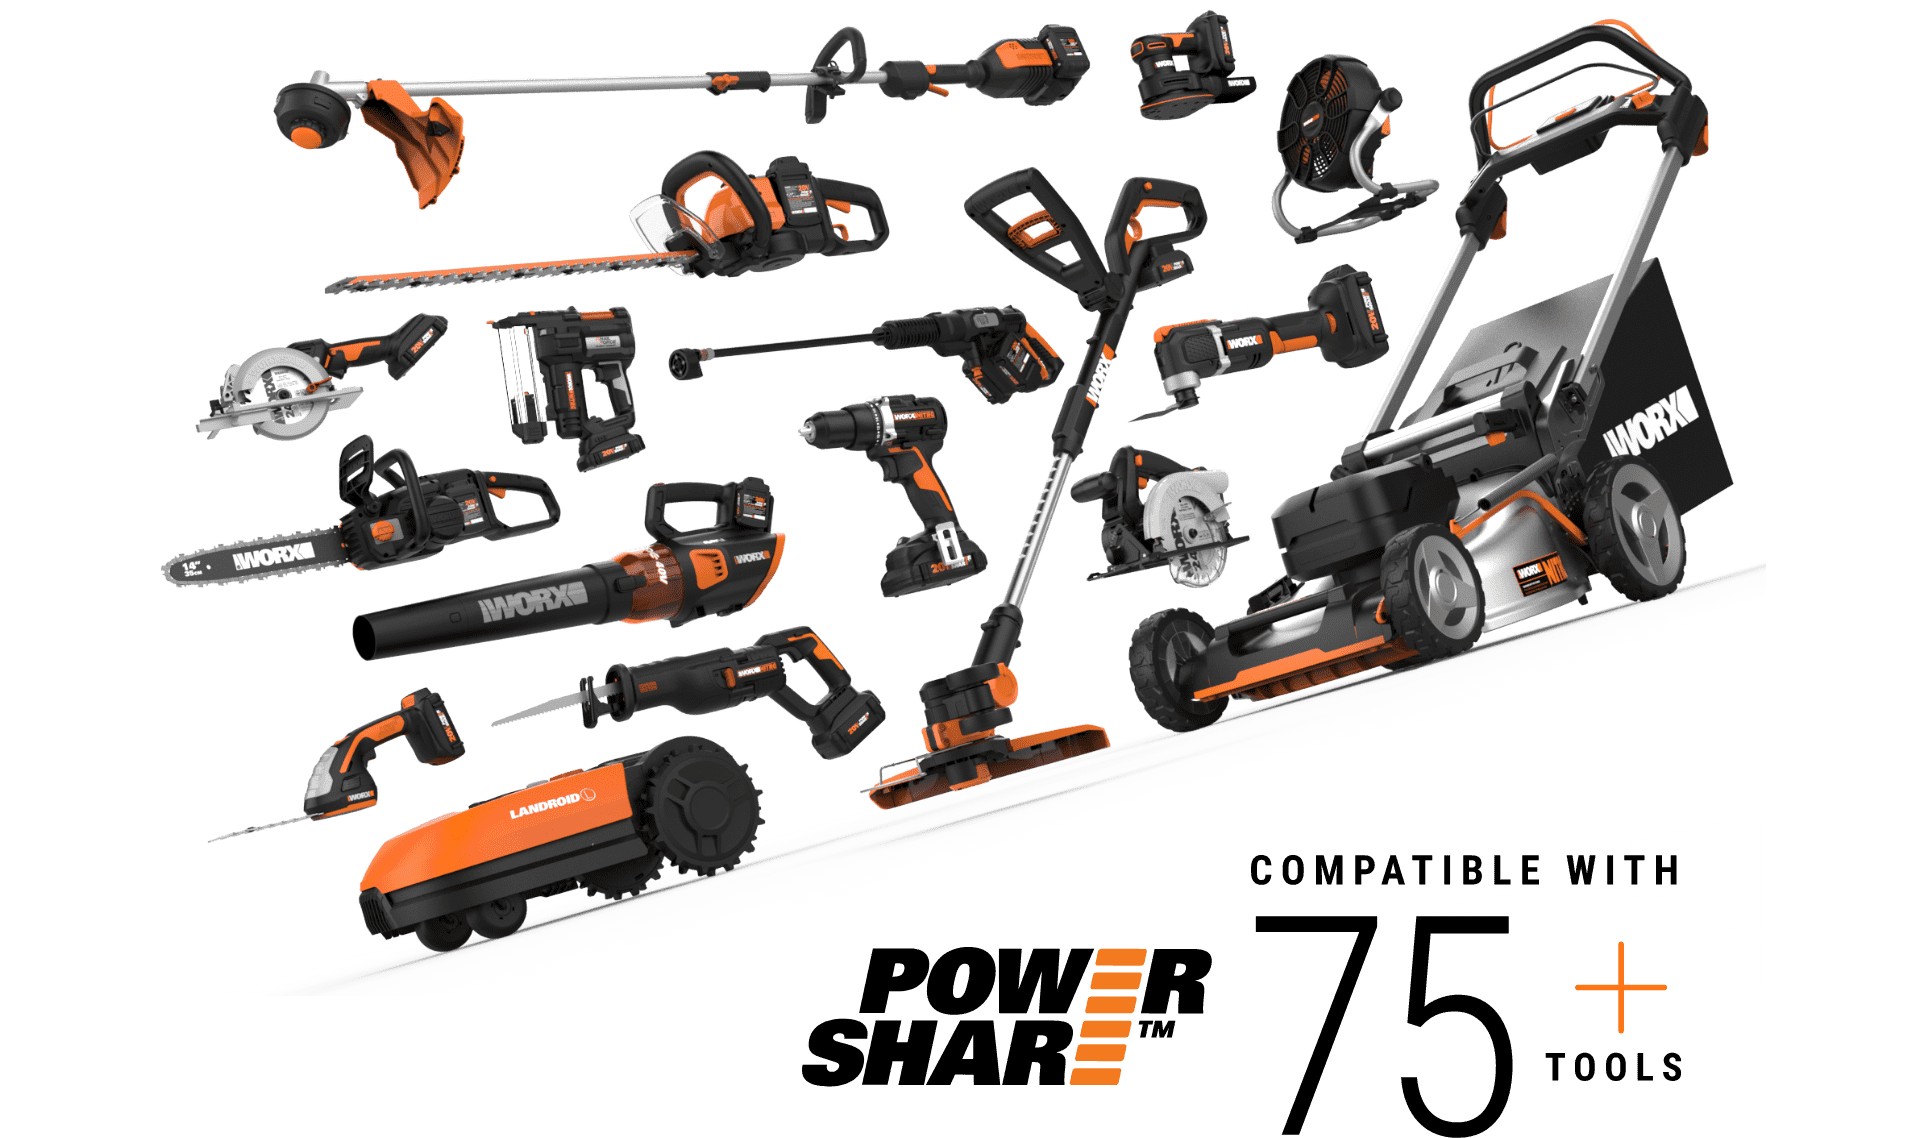 graphic showing that Power Share and Power Share Pro batteries are compatible with over 75 Worx tools including lawn mowers, robotic mowers, trimmers, saws, drills, blowers and more